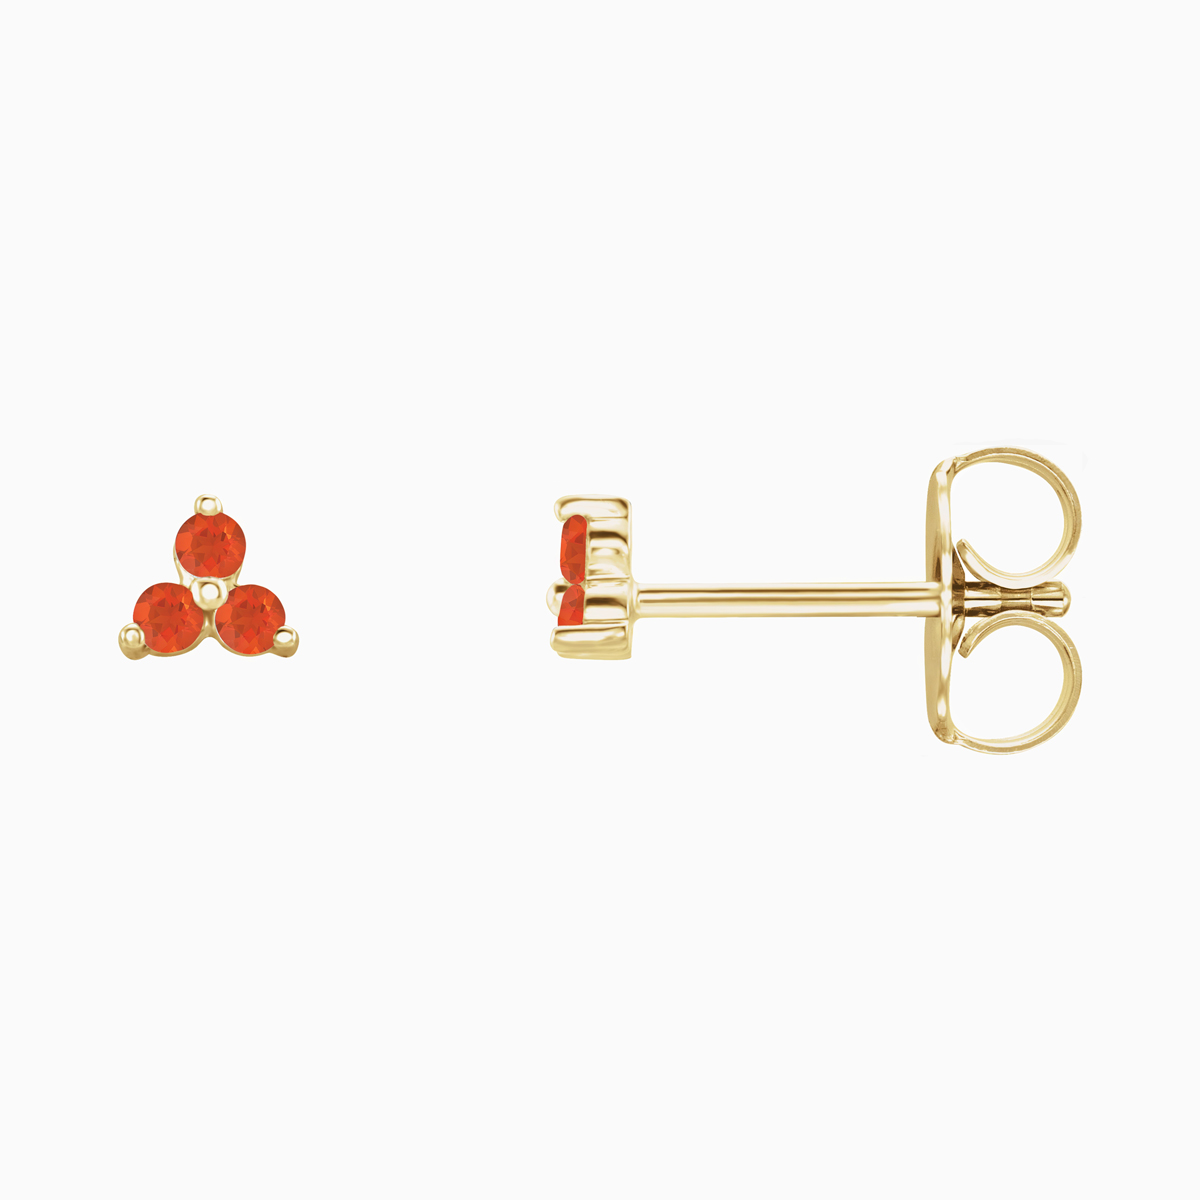 Natural Mexican Fire Opal Three Stud Earring, 14k Yellow Gold